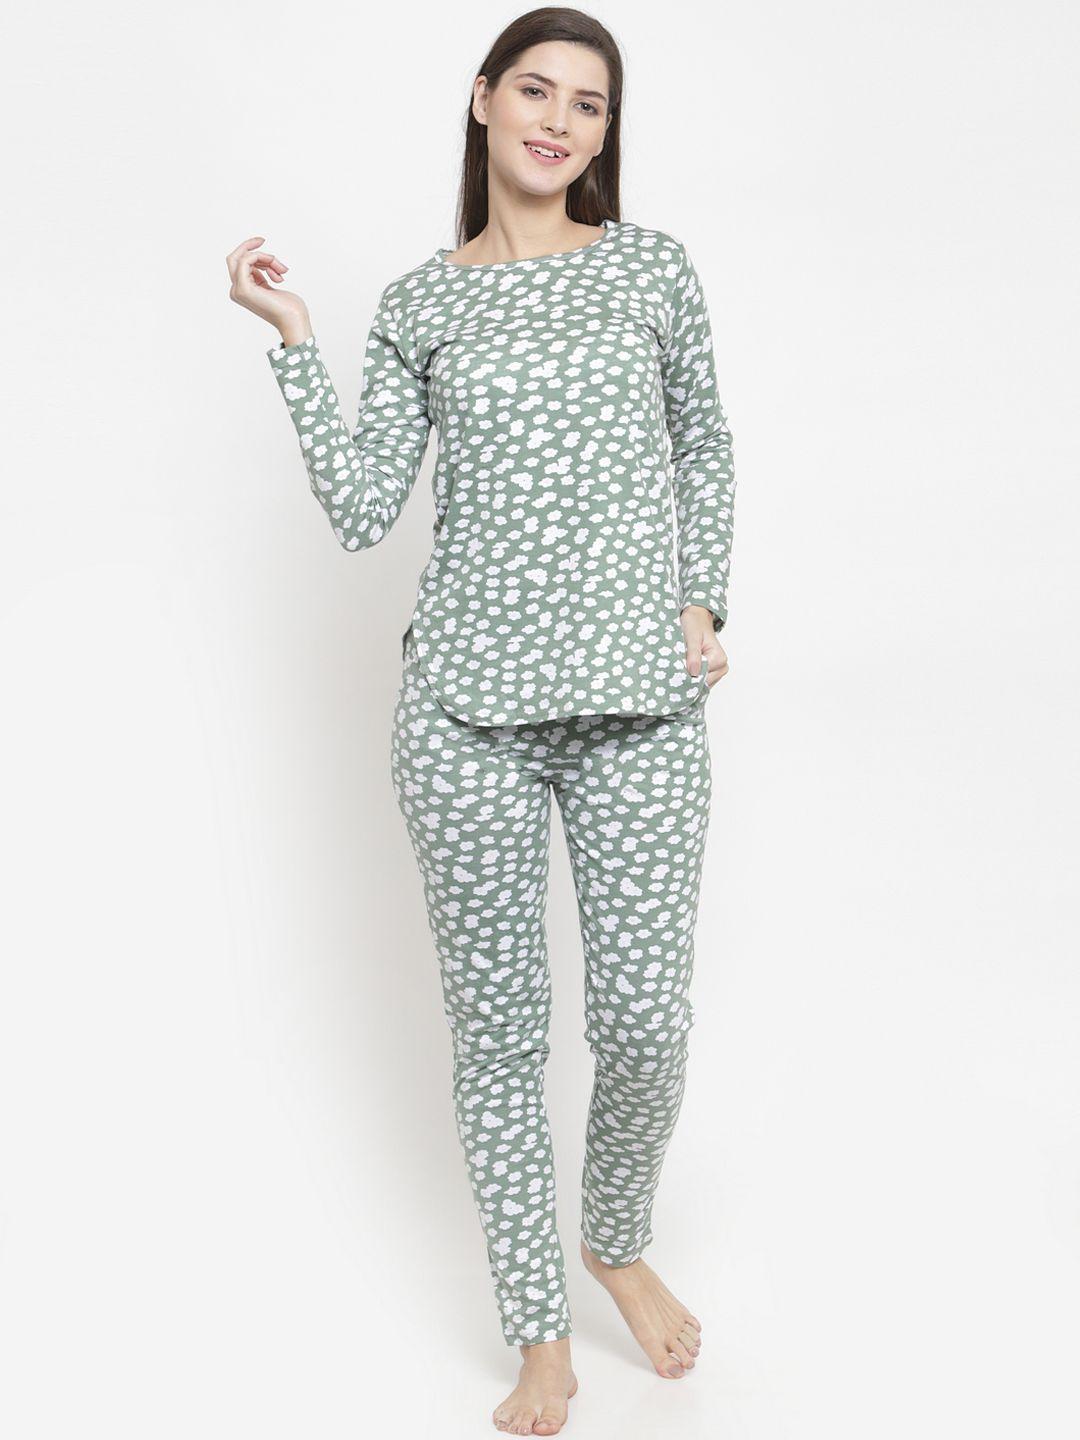 claura women green & white printed night suit cot-151